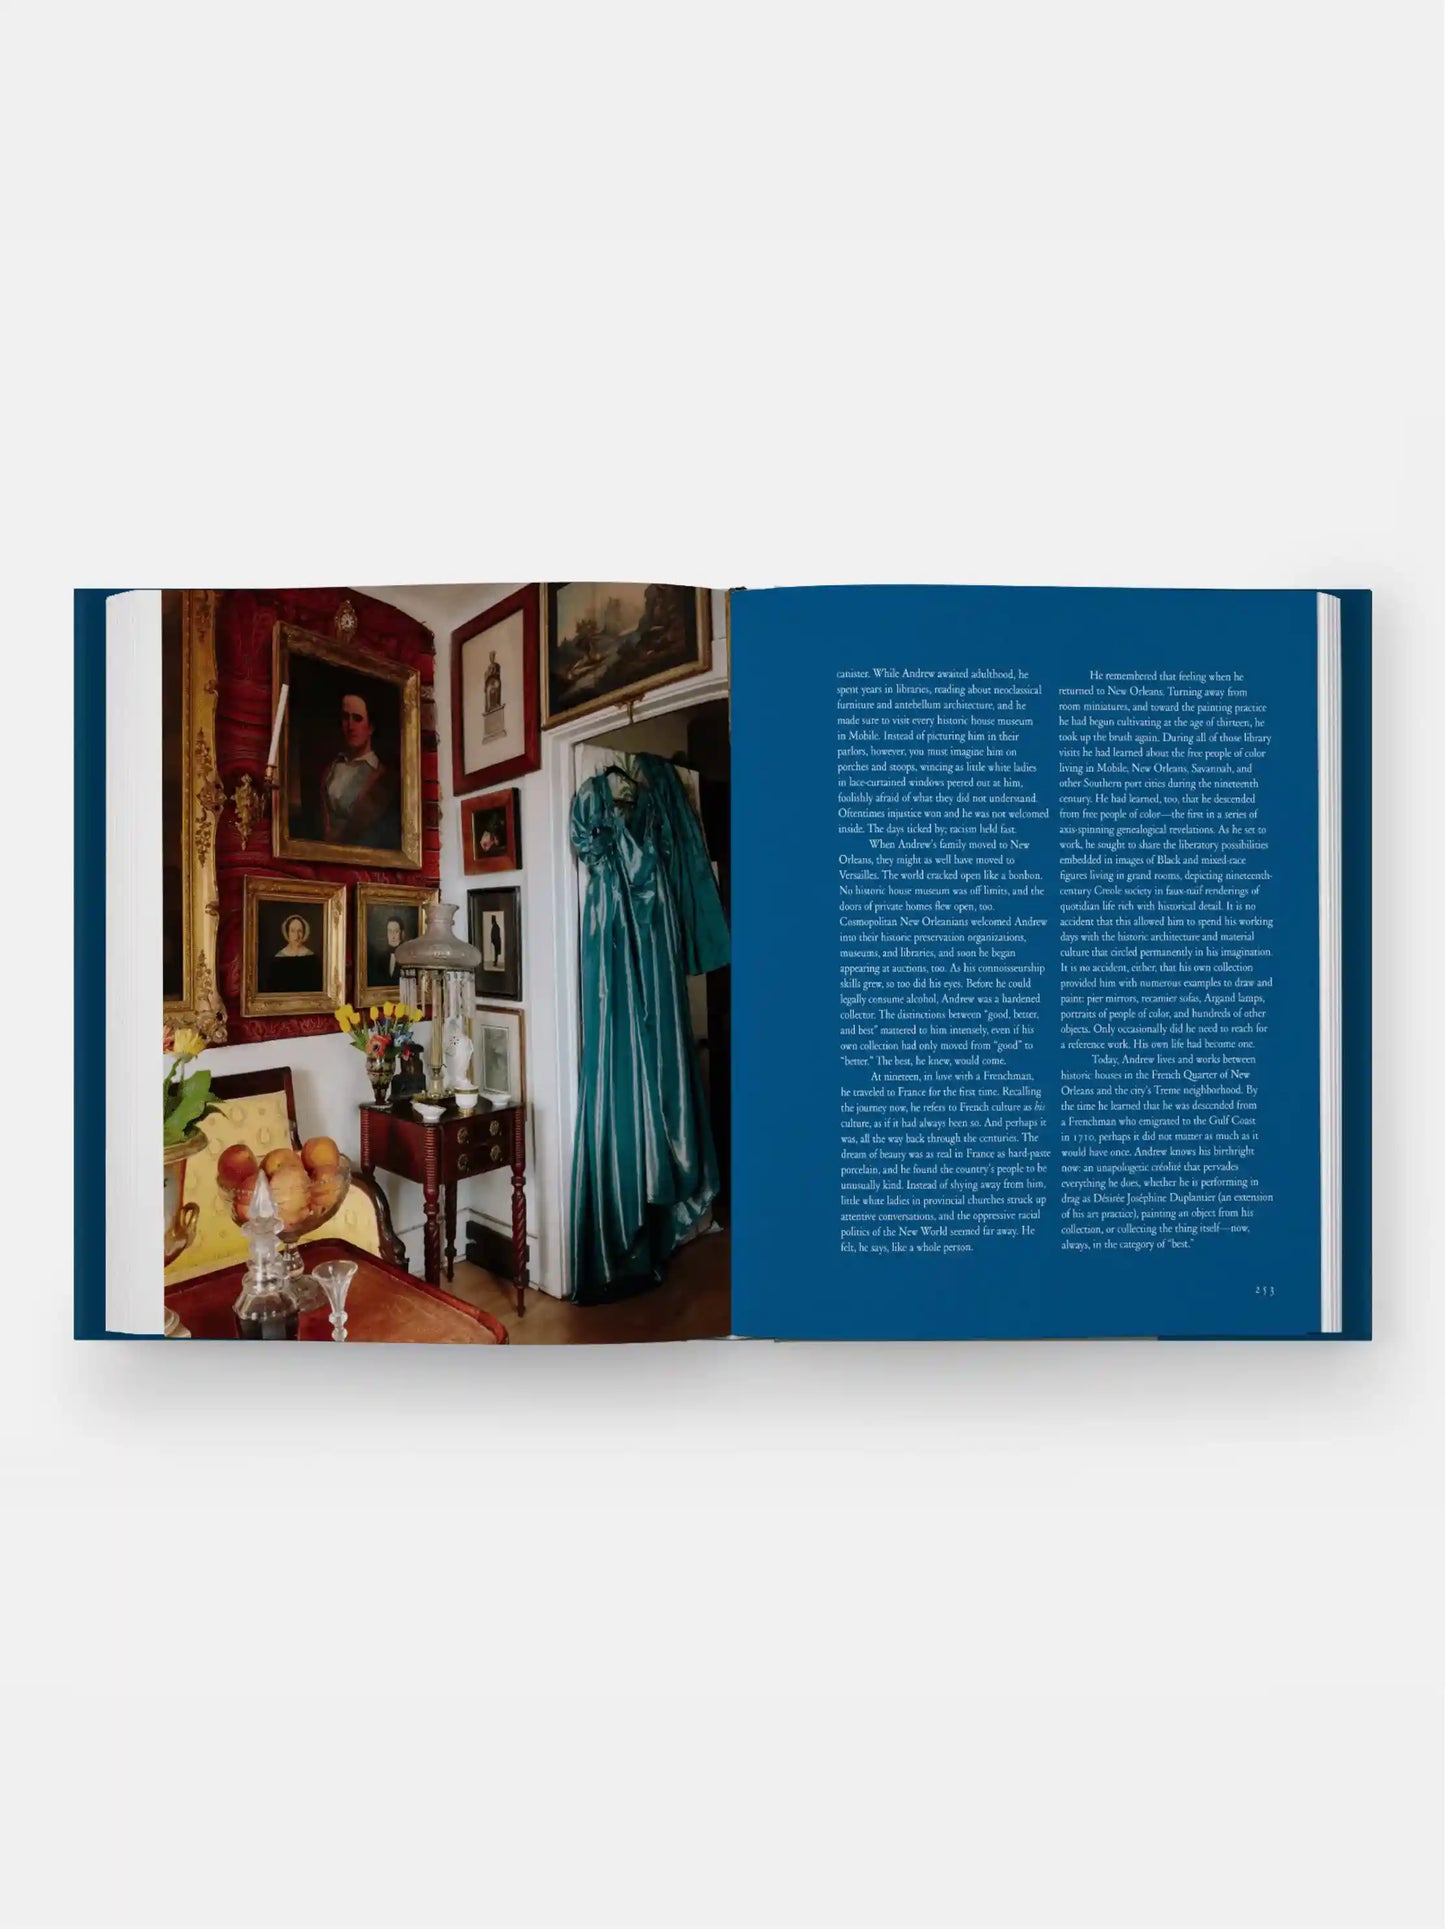 The New Antiquarians: At Home with Young Collectors Book